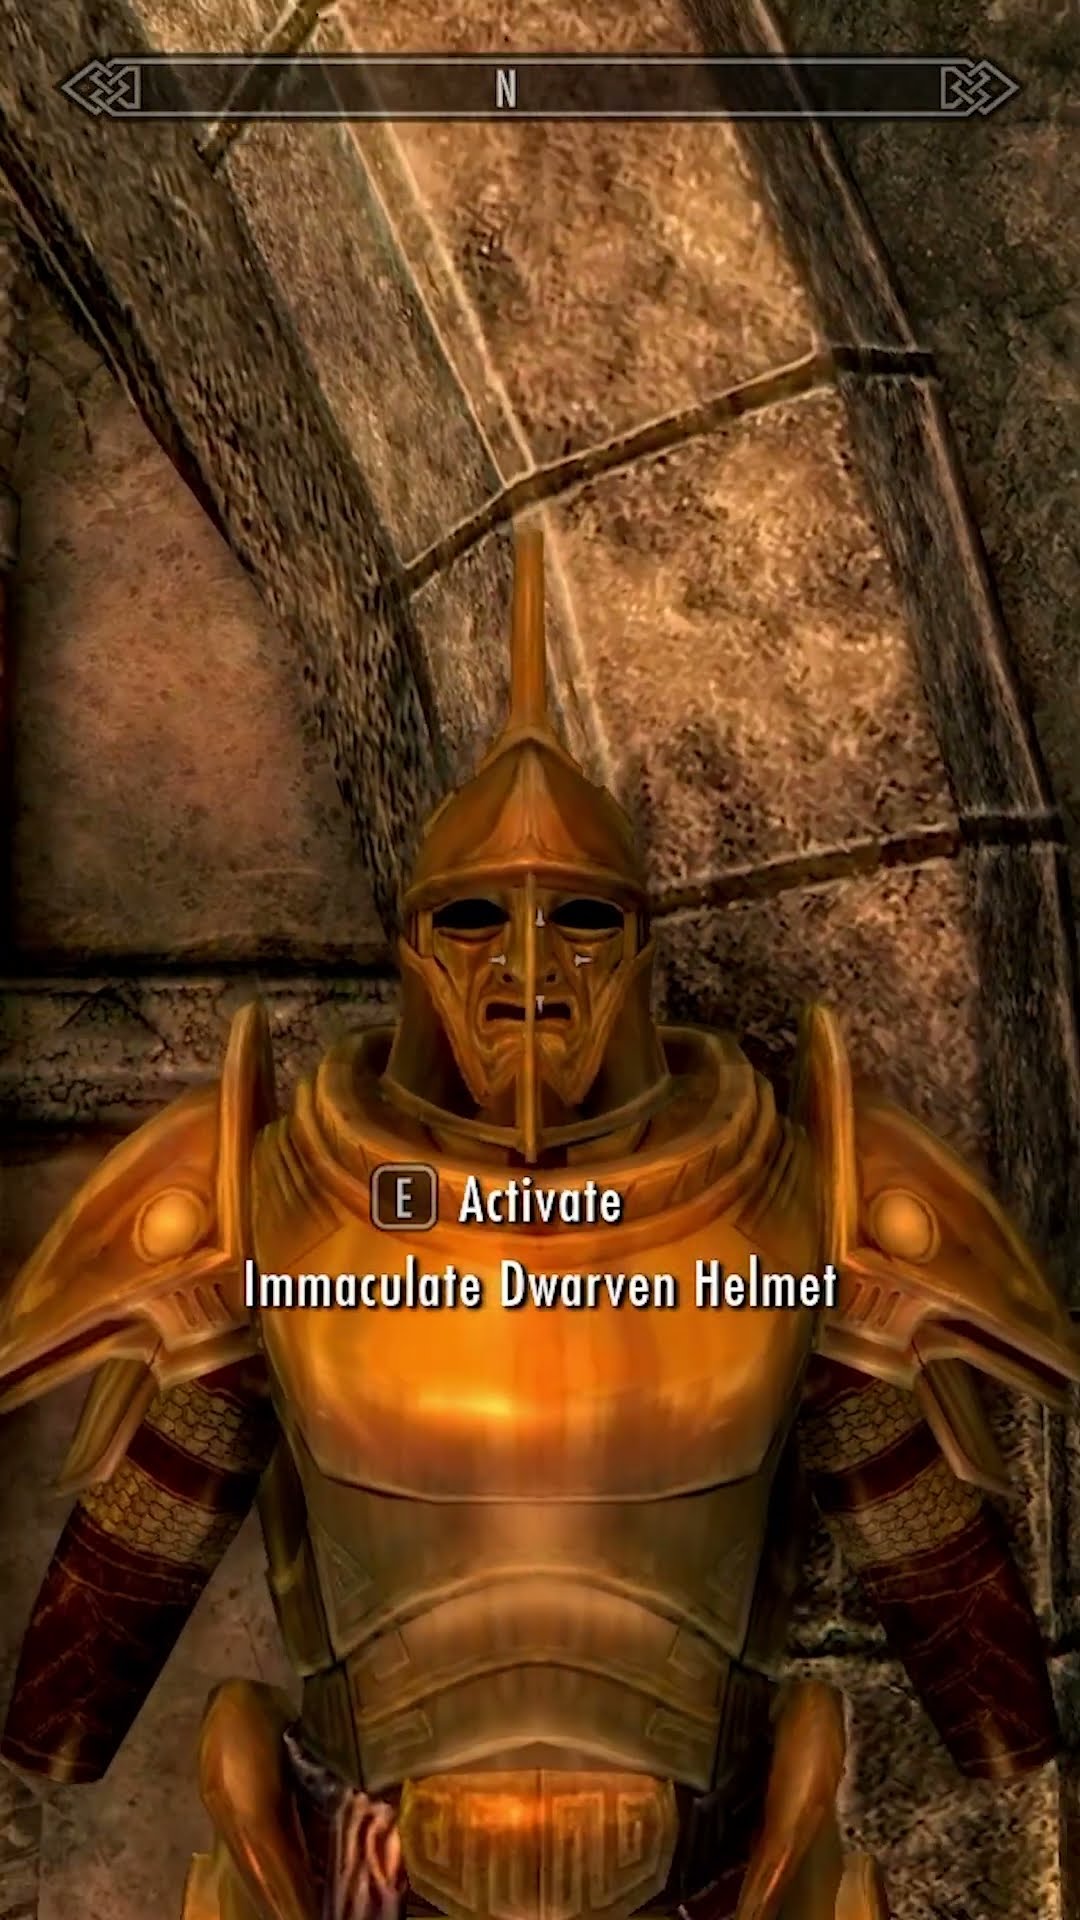 ali fifer recommends skyrim immaculate dwarven armor pic